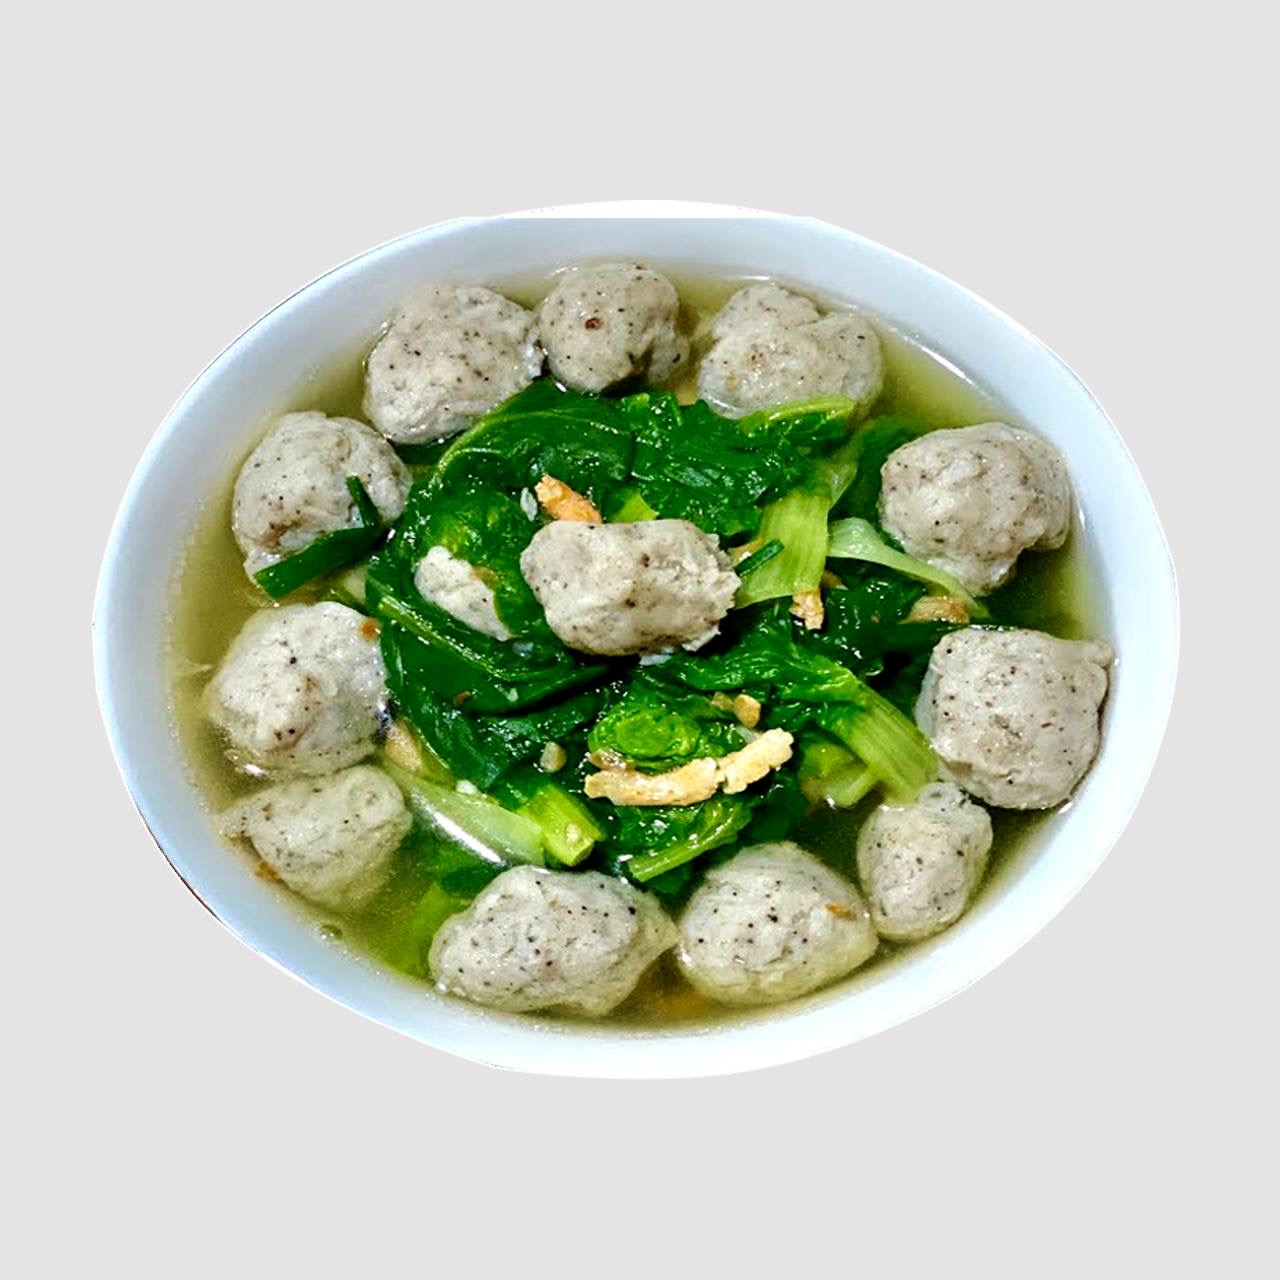 24.Boil vegetable with fish meatballs